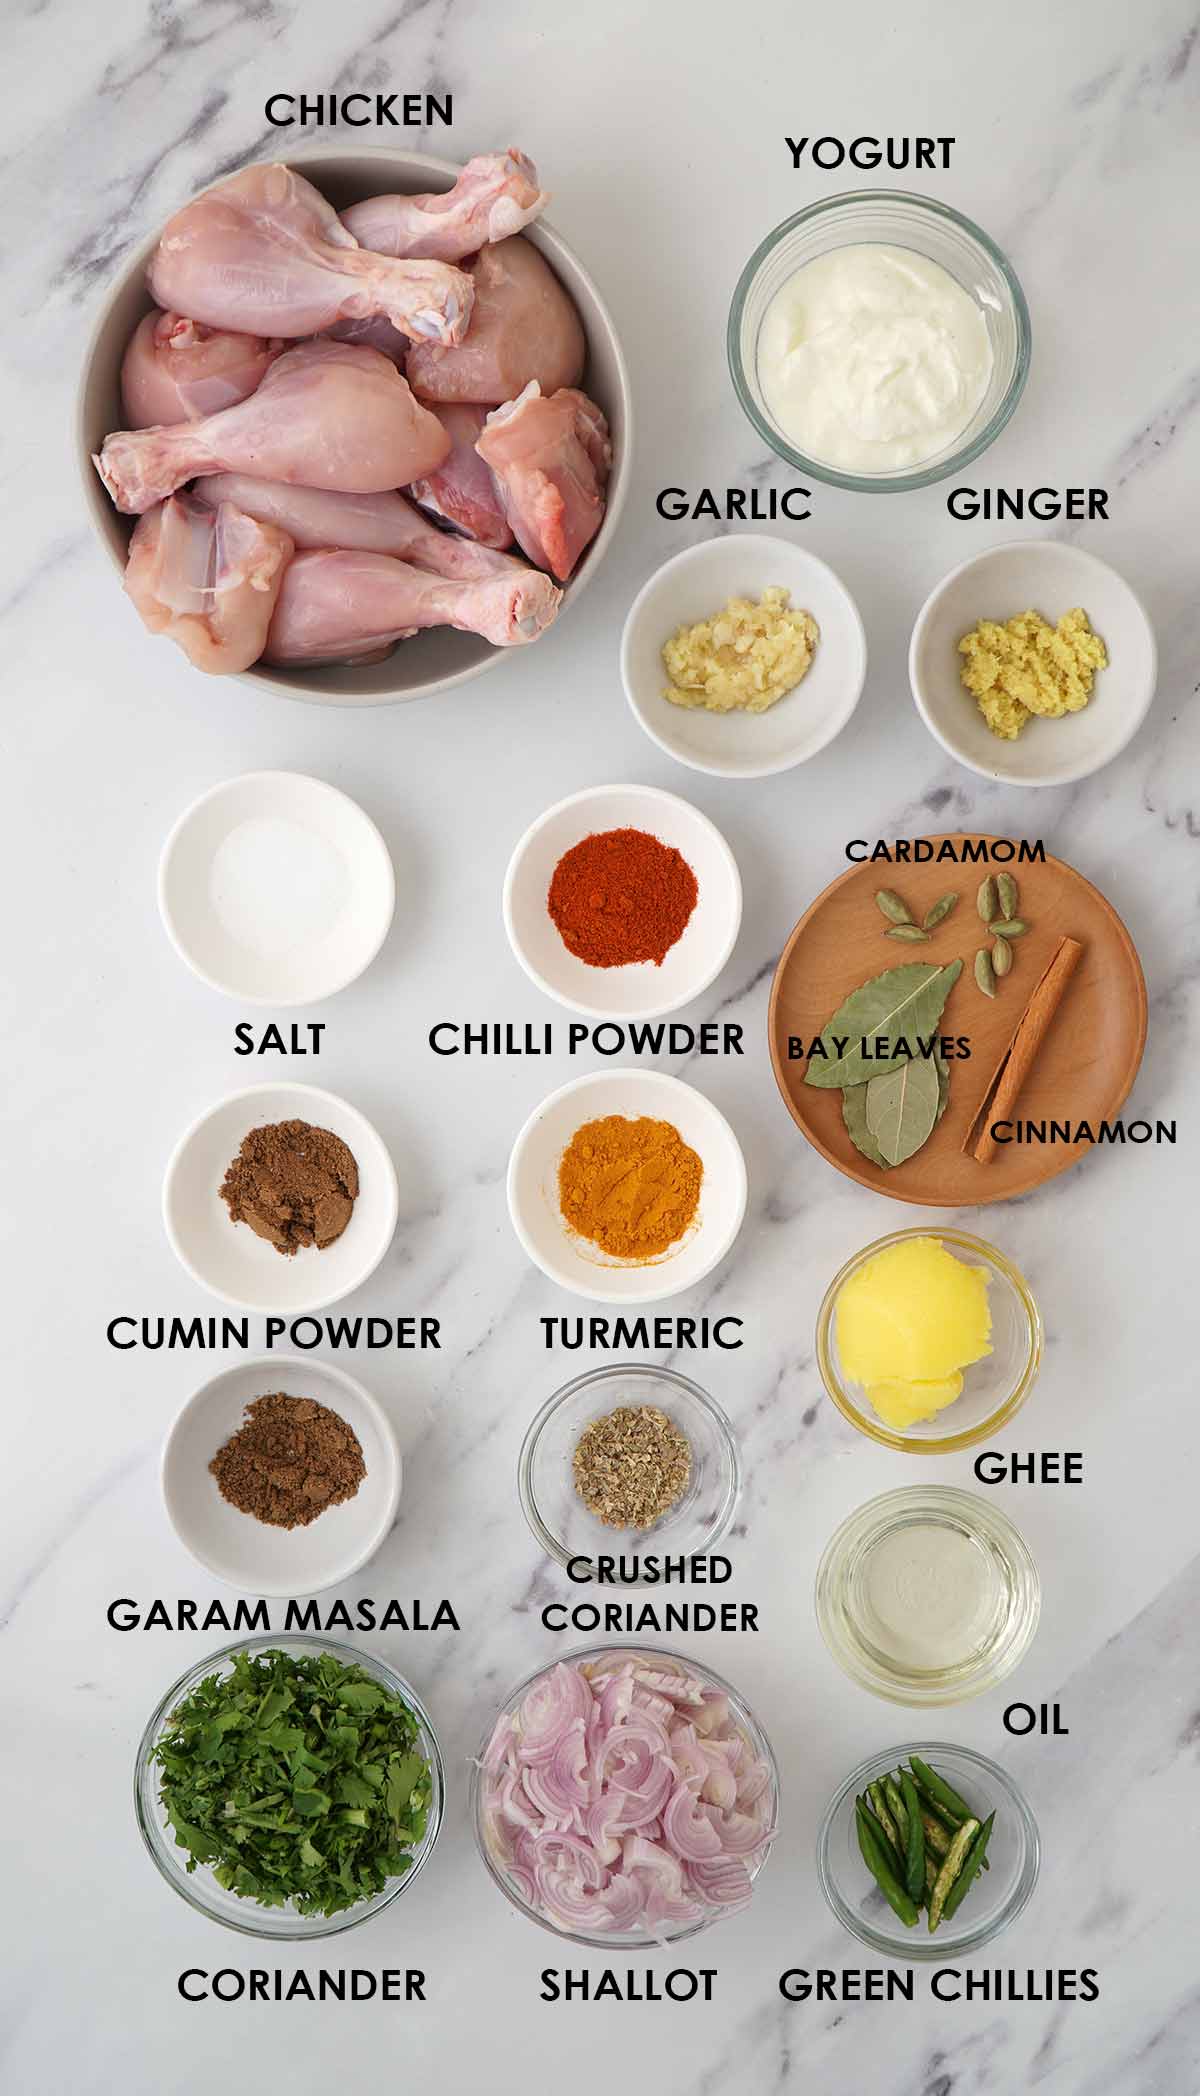 Labelled ingredients of chicken marinade, spices, and curry sauce ingredients.